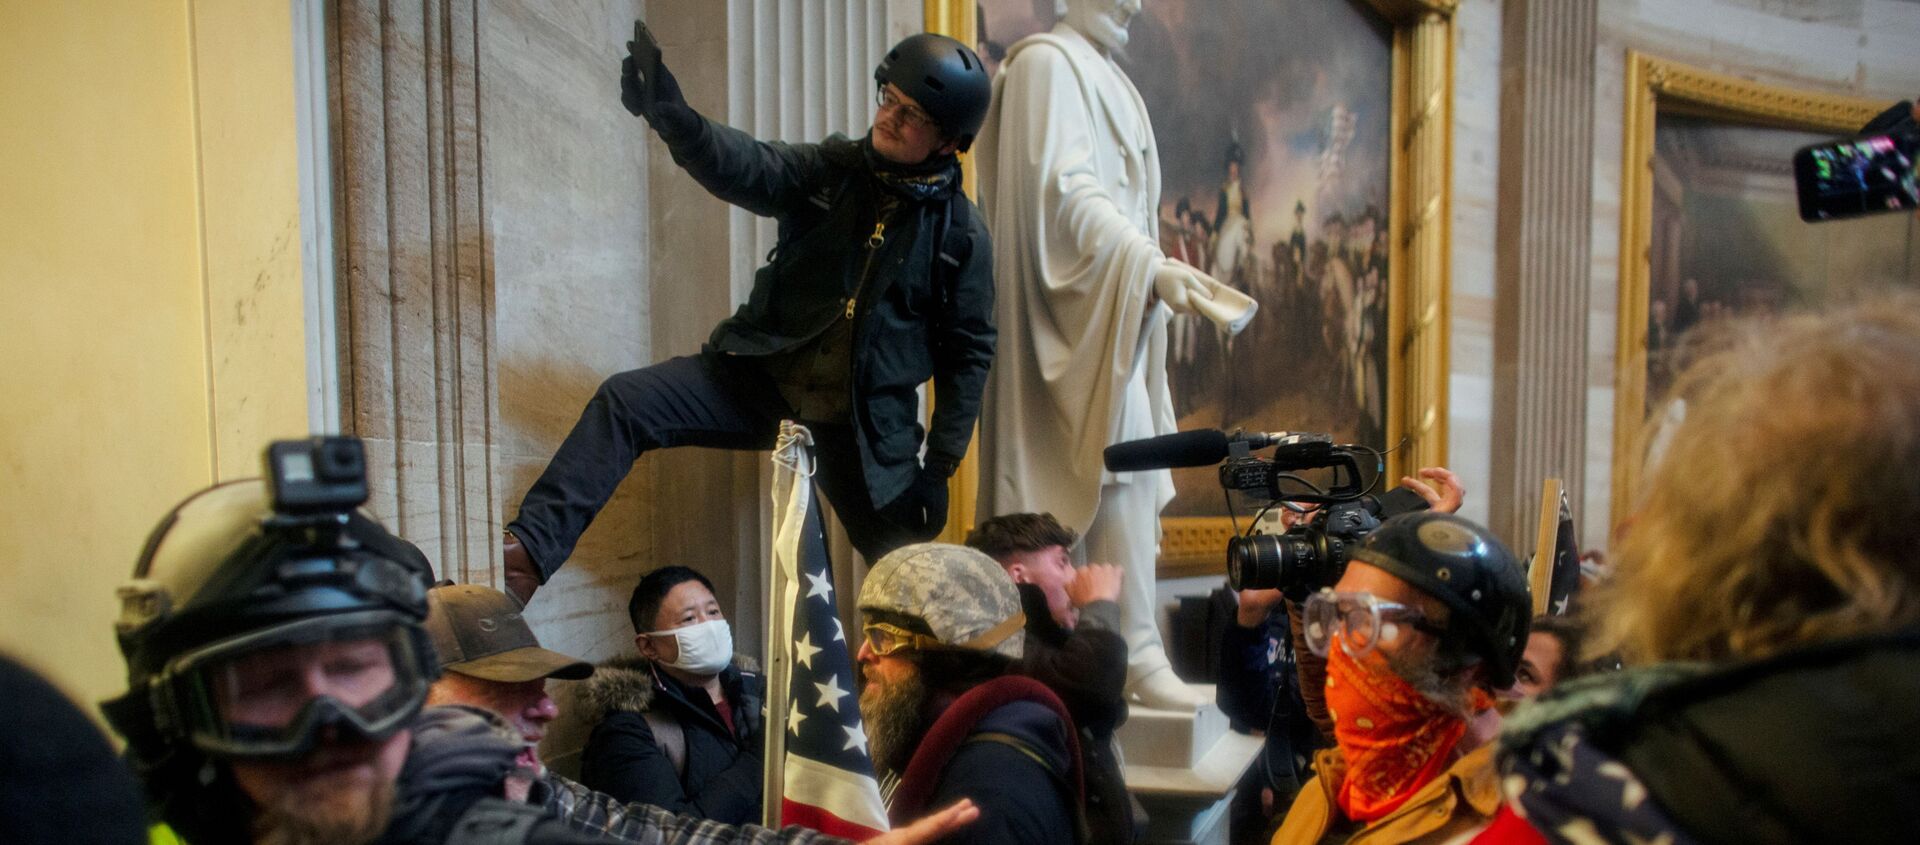 FILE PHOTO: Pro-Trump protesters storm the U.S. Capitol to contest the certification of the 2020 U.S. presidential election results by the U.S. Congress, at the U.S. Capitol Building in Washington, DC., 6 January 2021.  - Sputnik International, 1920, 16.06.2021